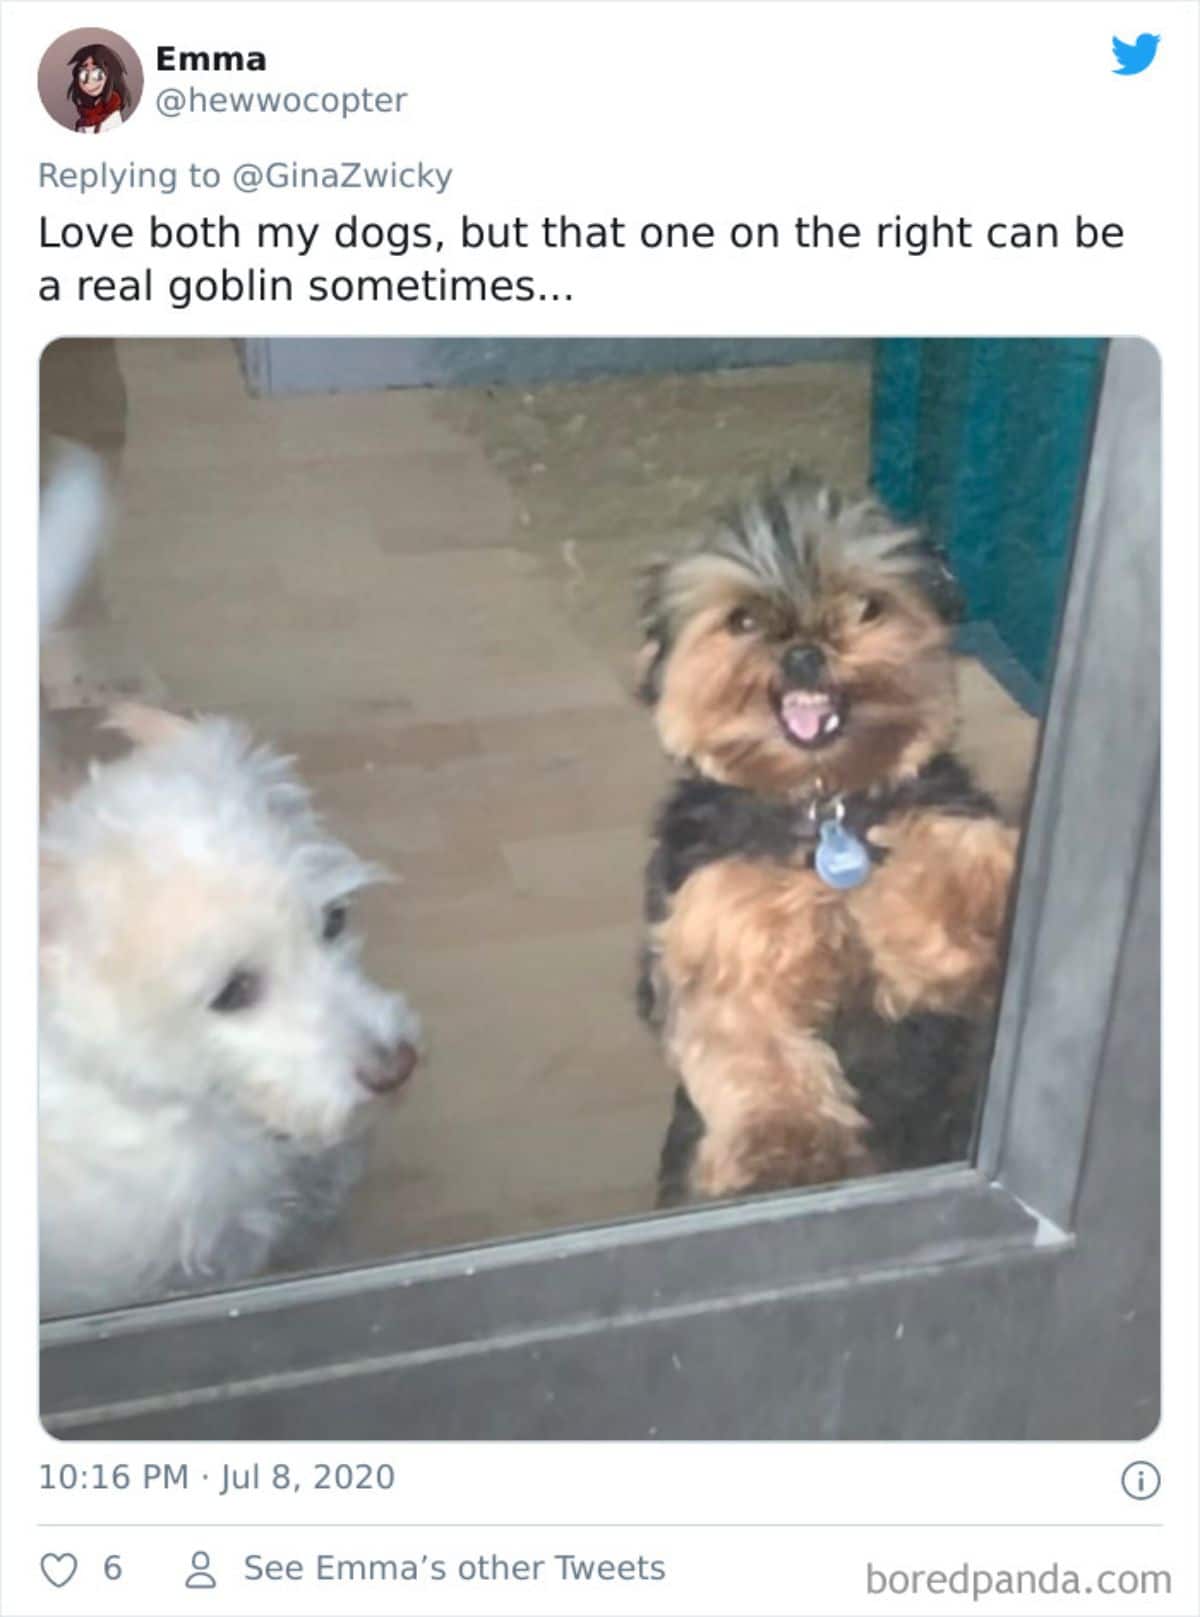 tweet of a white fluffy dog and brown and black fluffy dog at a glass door with the brown and black dog standing upright and growling